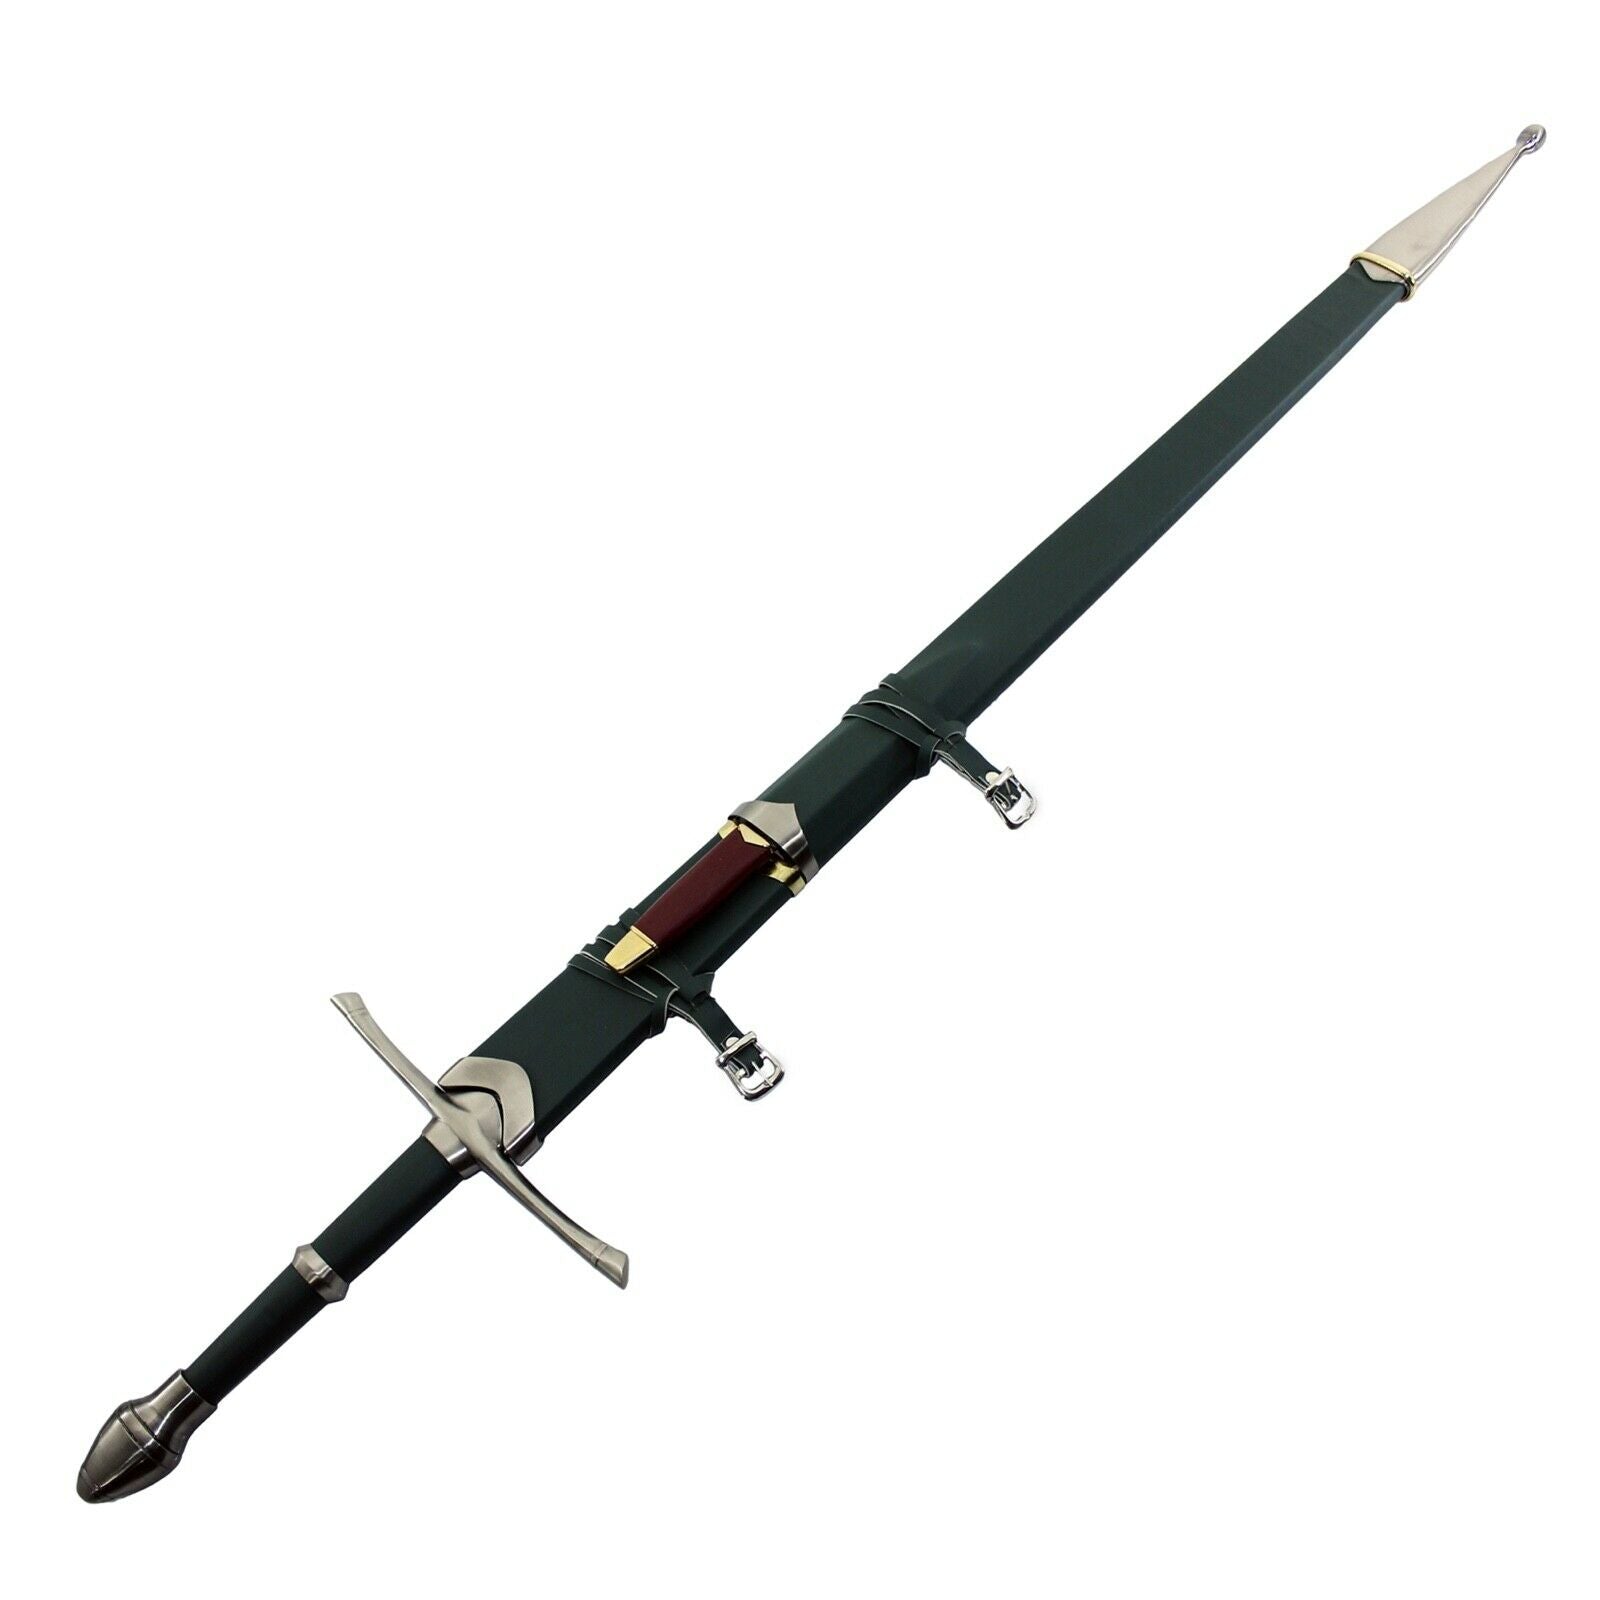 Aragorn lord of the rings strider sword replica for sale With Green Color lotr Strider knife